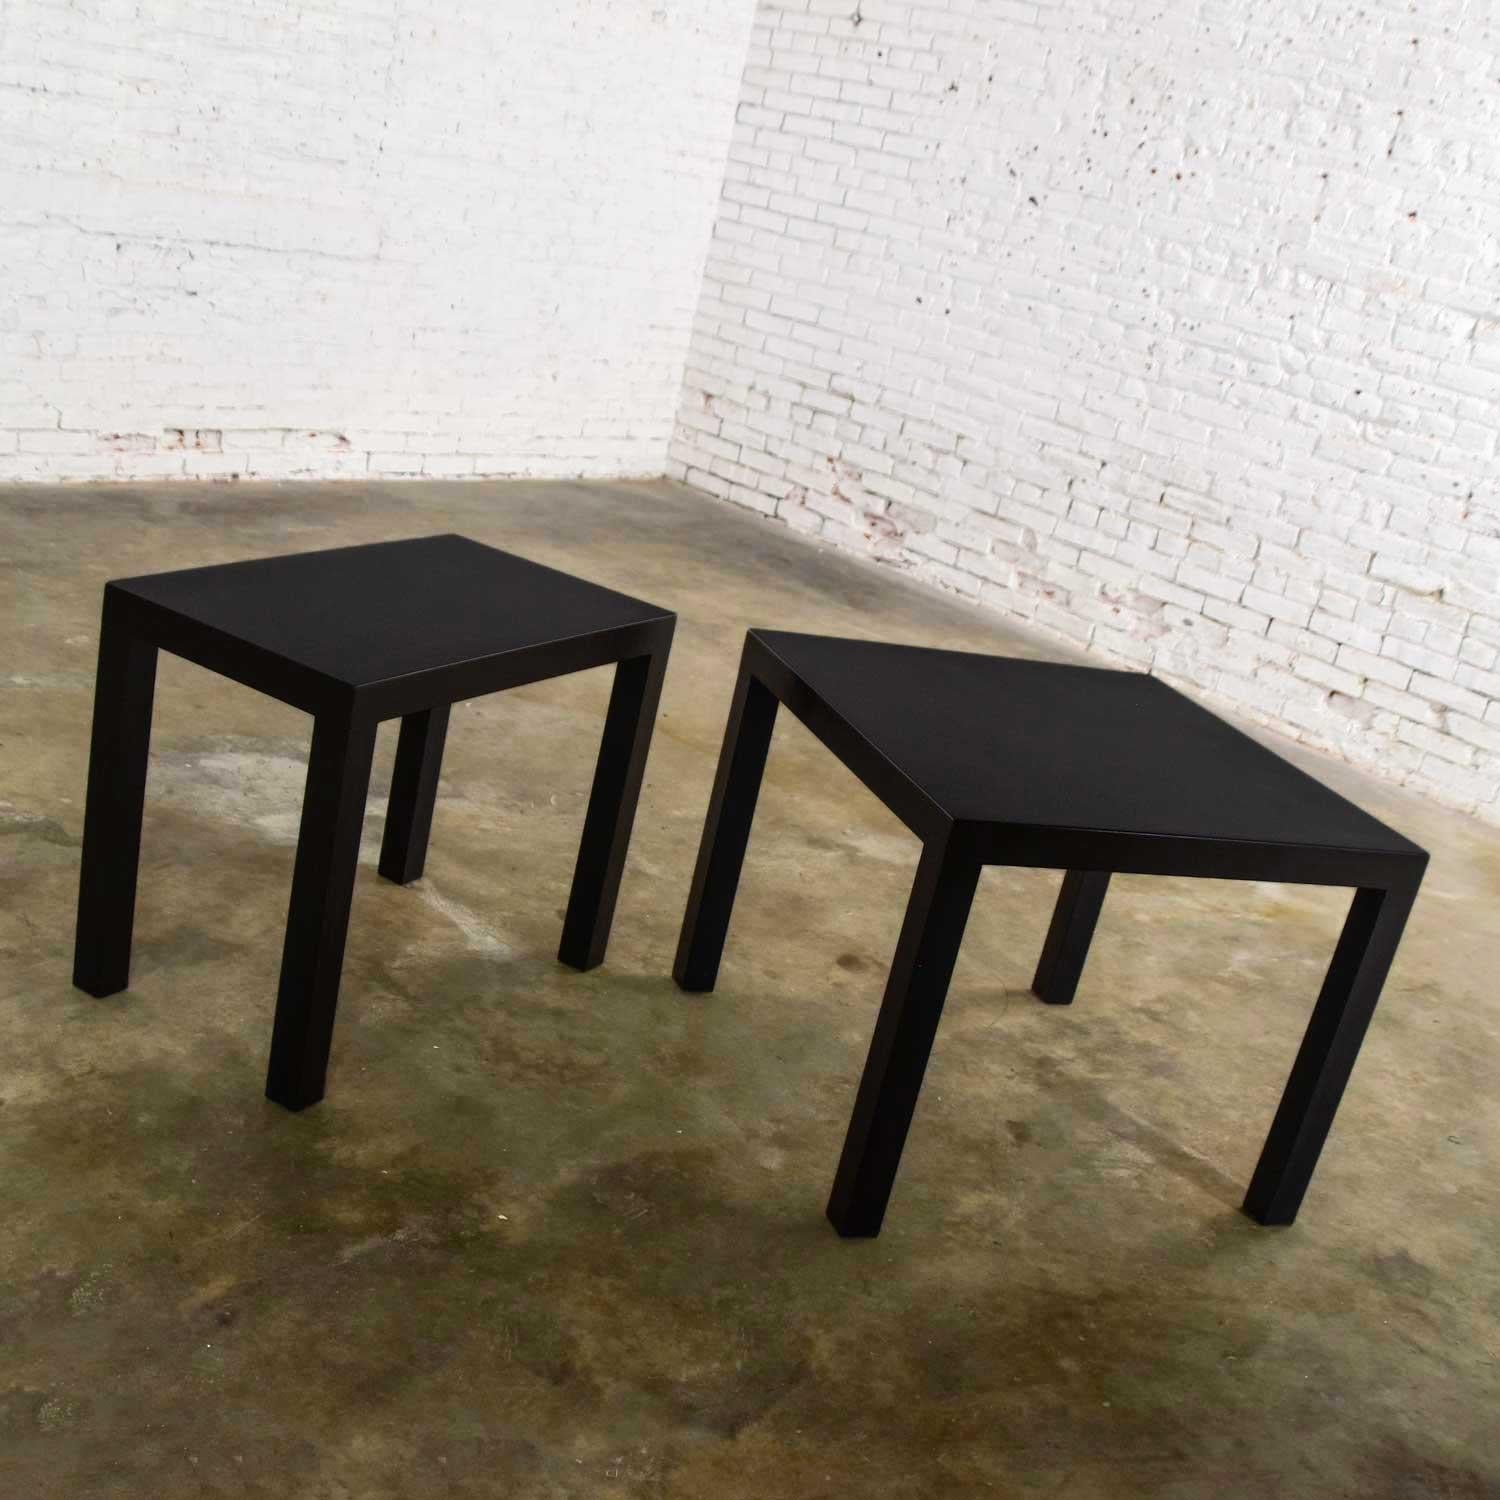 20th Century Mid-Century Modern Black Painted Parsons Side Tables 1 Square 1 Rectangle, Pair